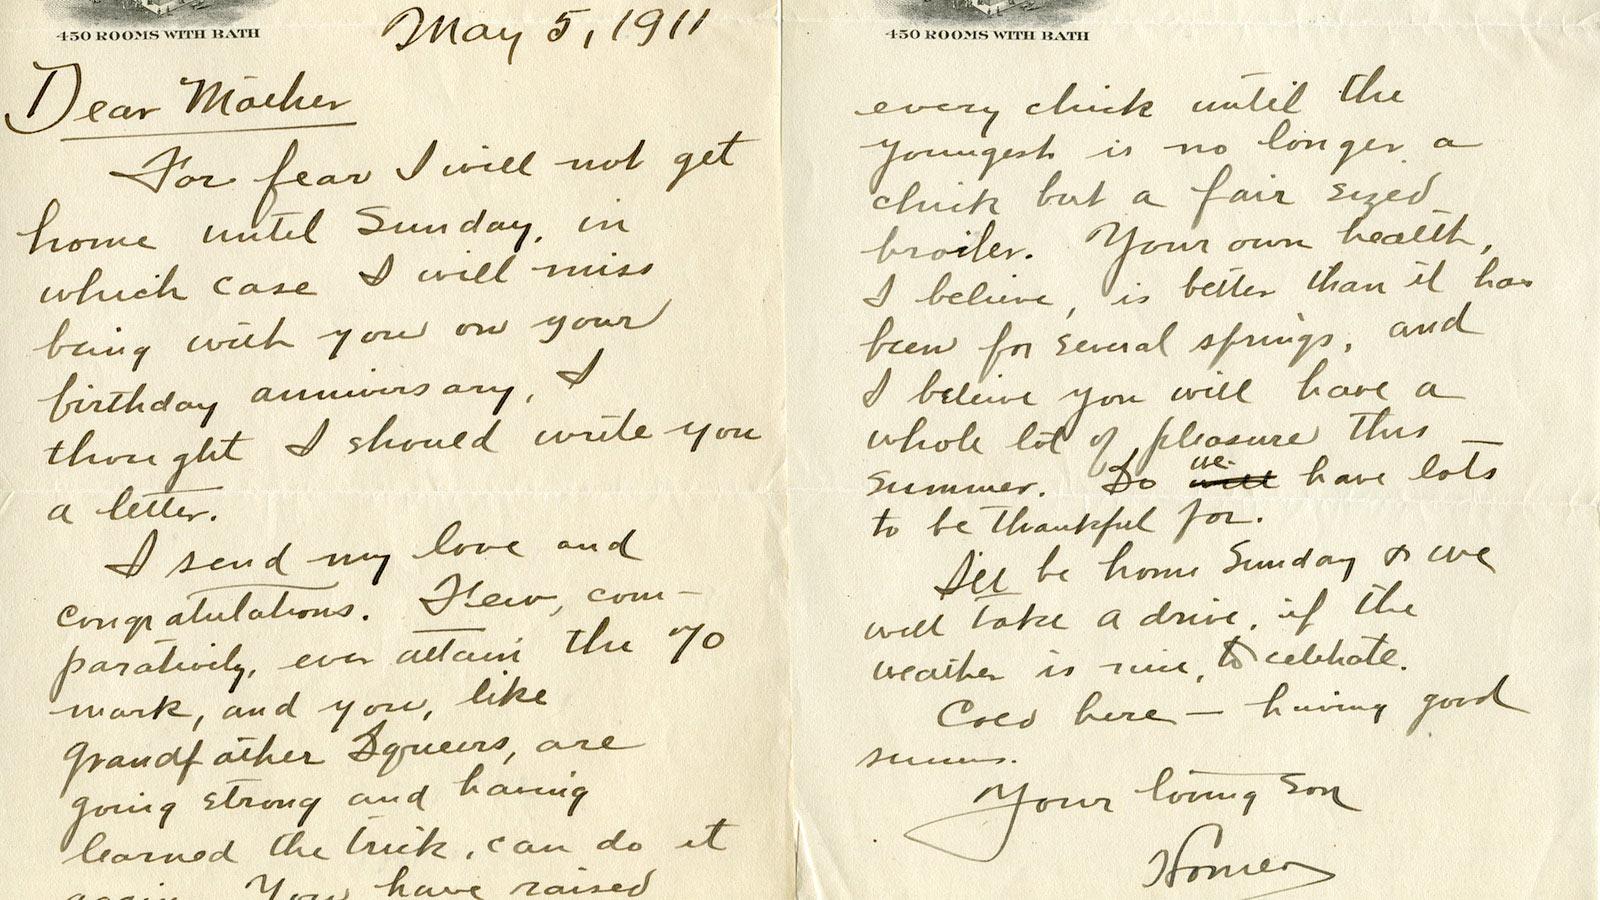 Scan of a letter from Homer Pace to his mother in 1911 asking permission to get married